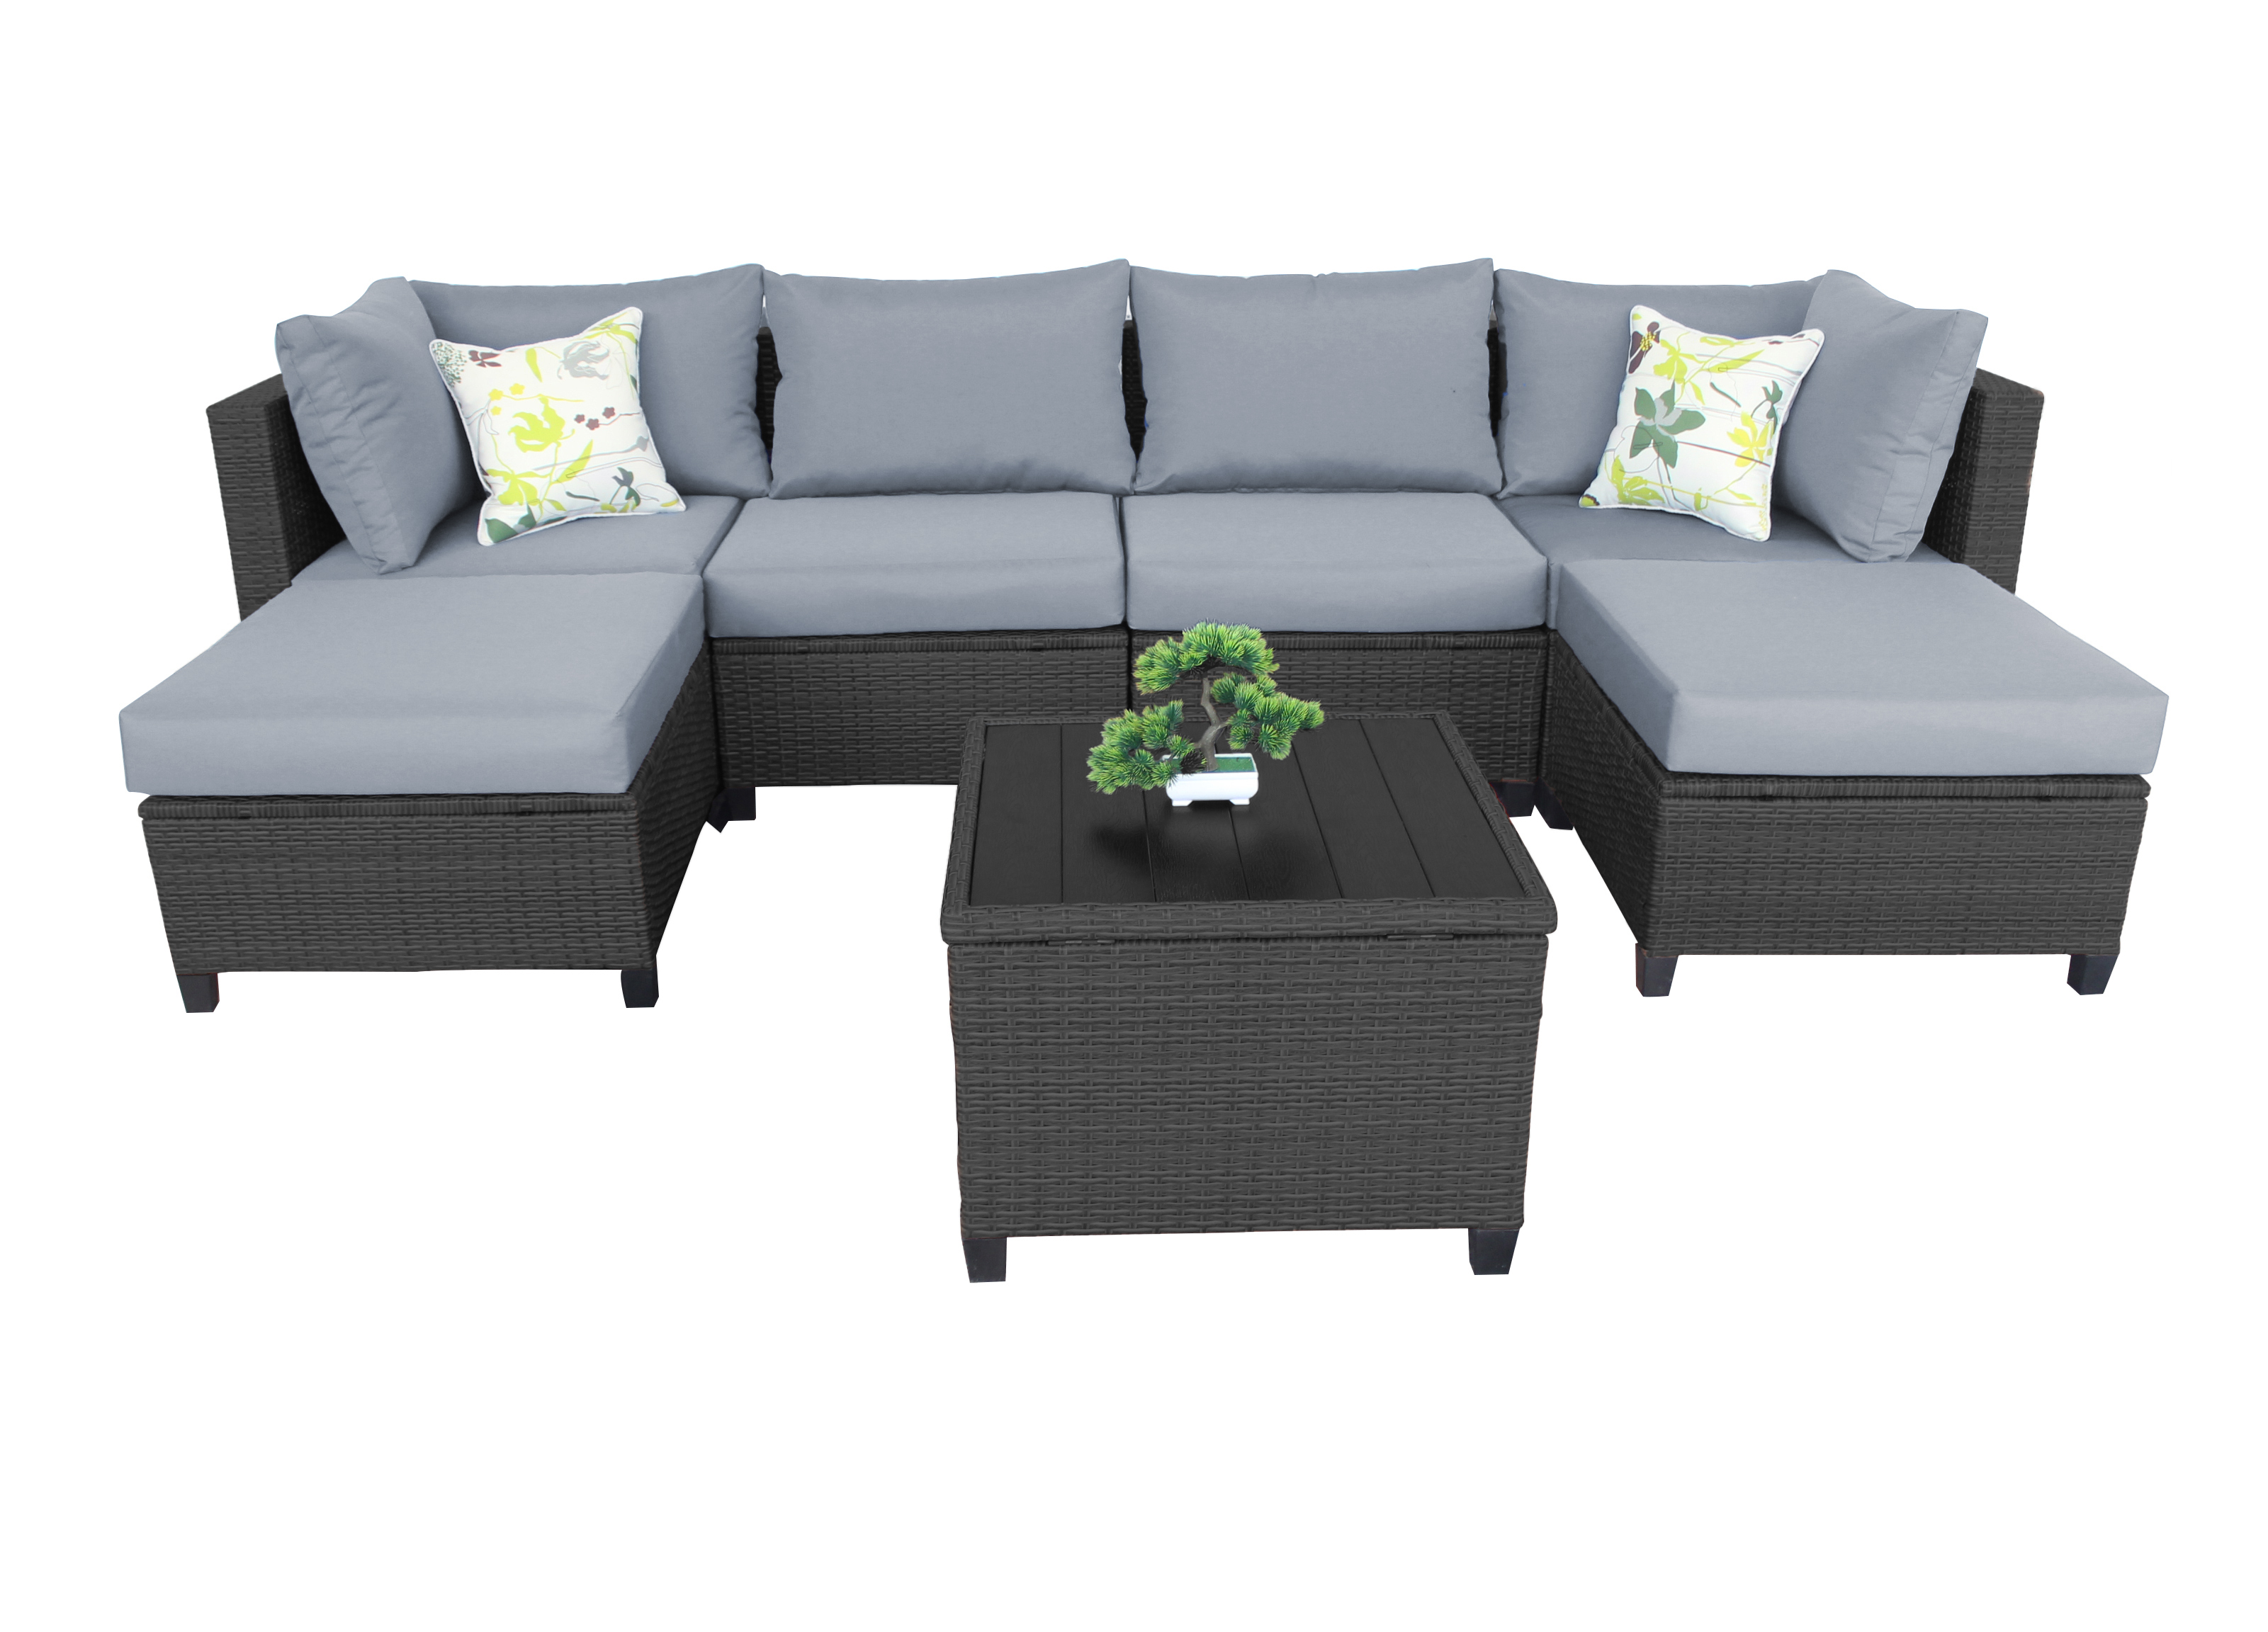 6-Seater Outdoor Wicker Sofa Group with Cushion -CASAINC